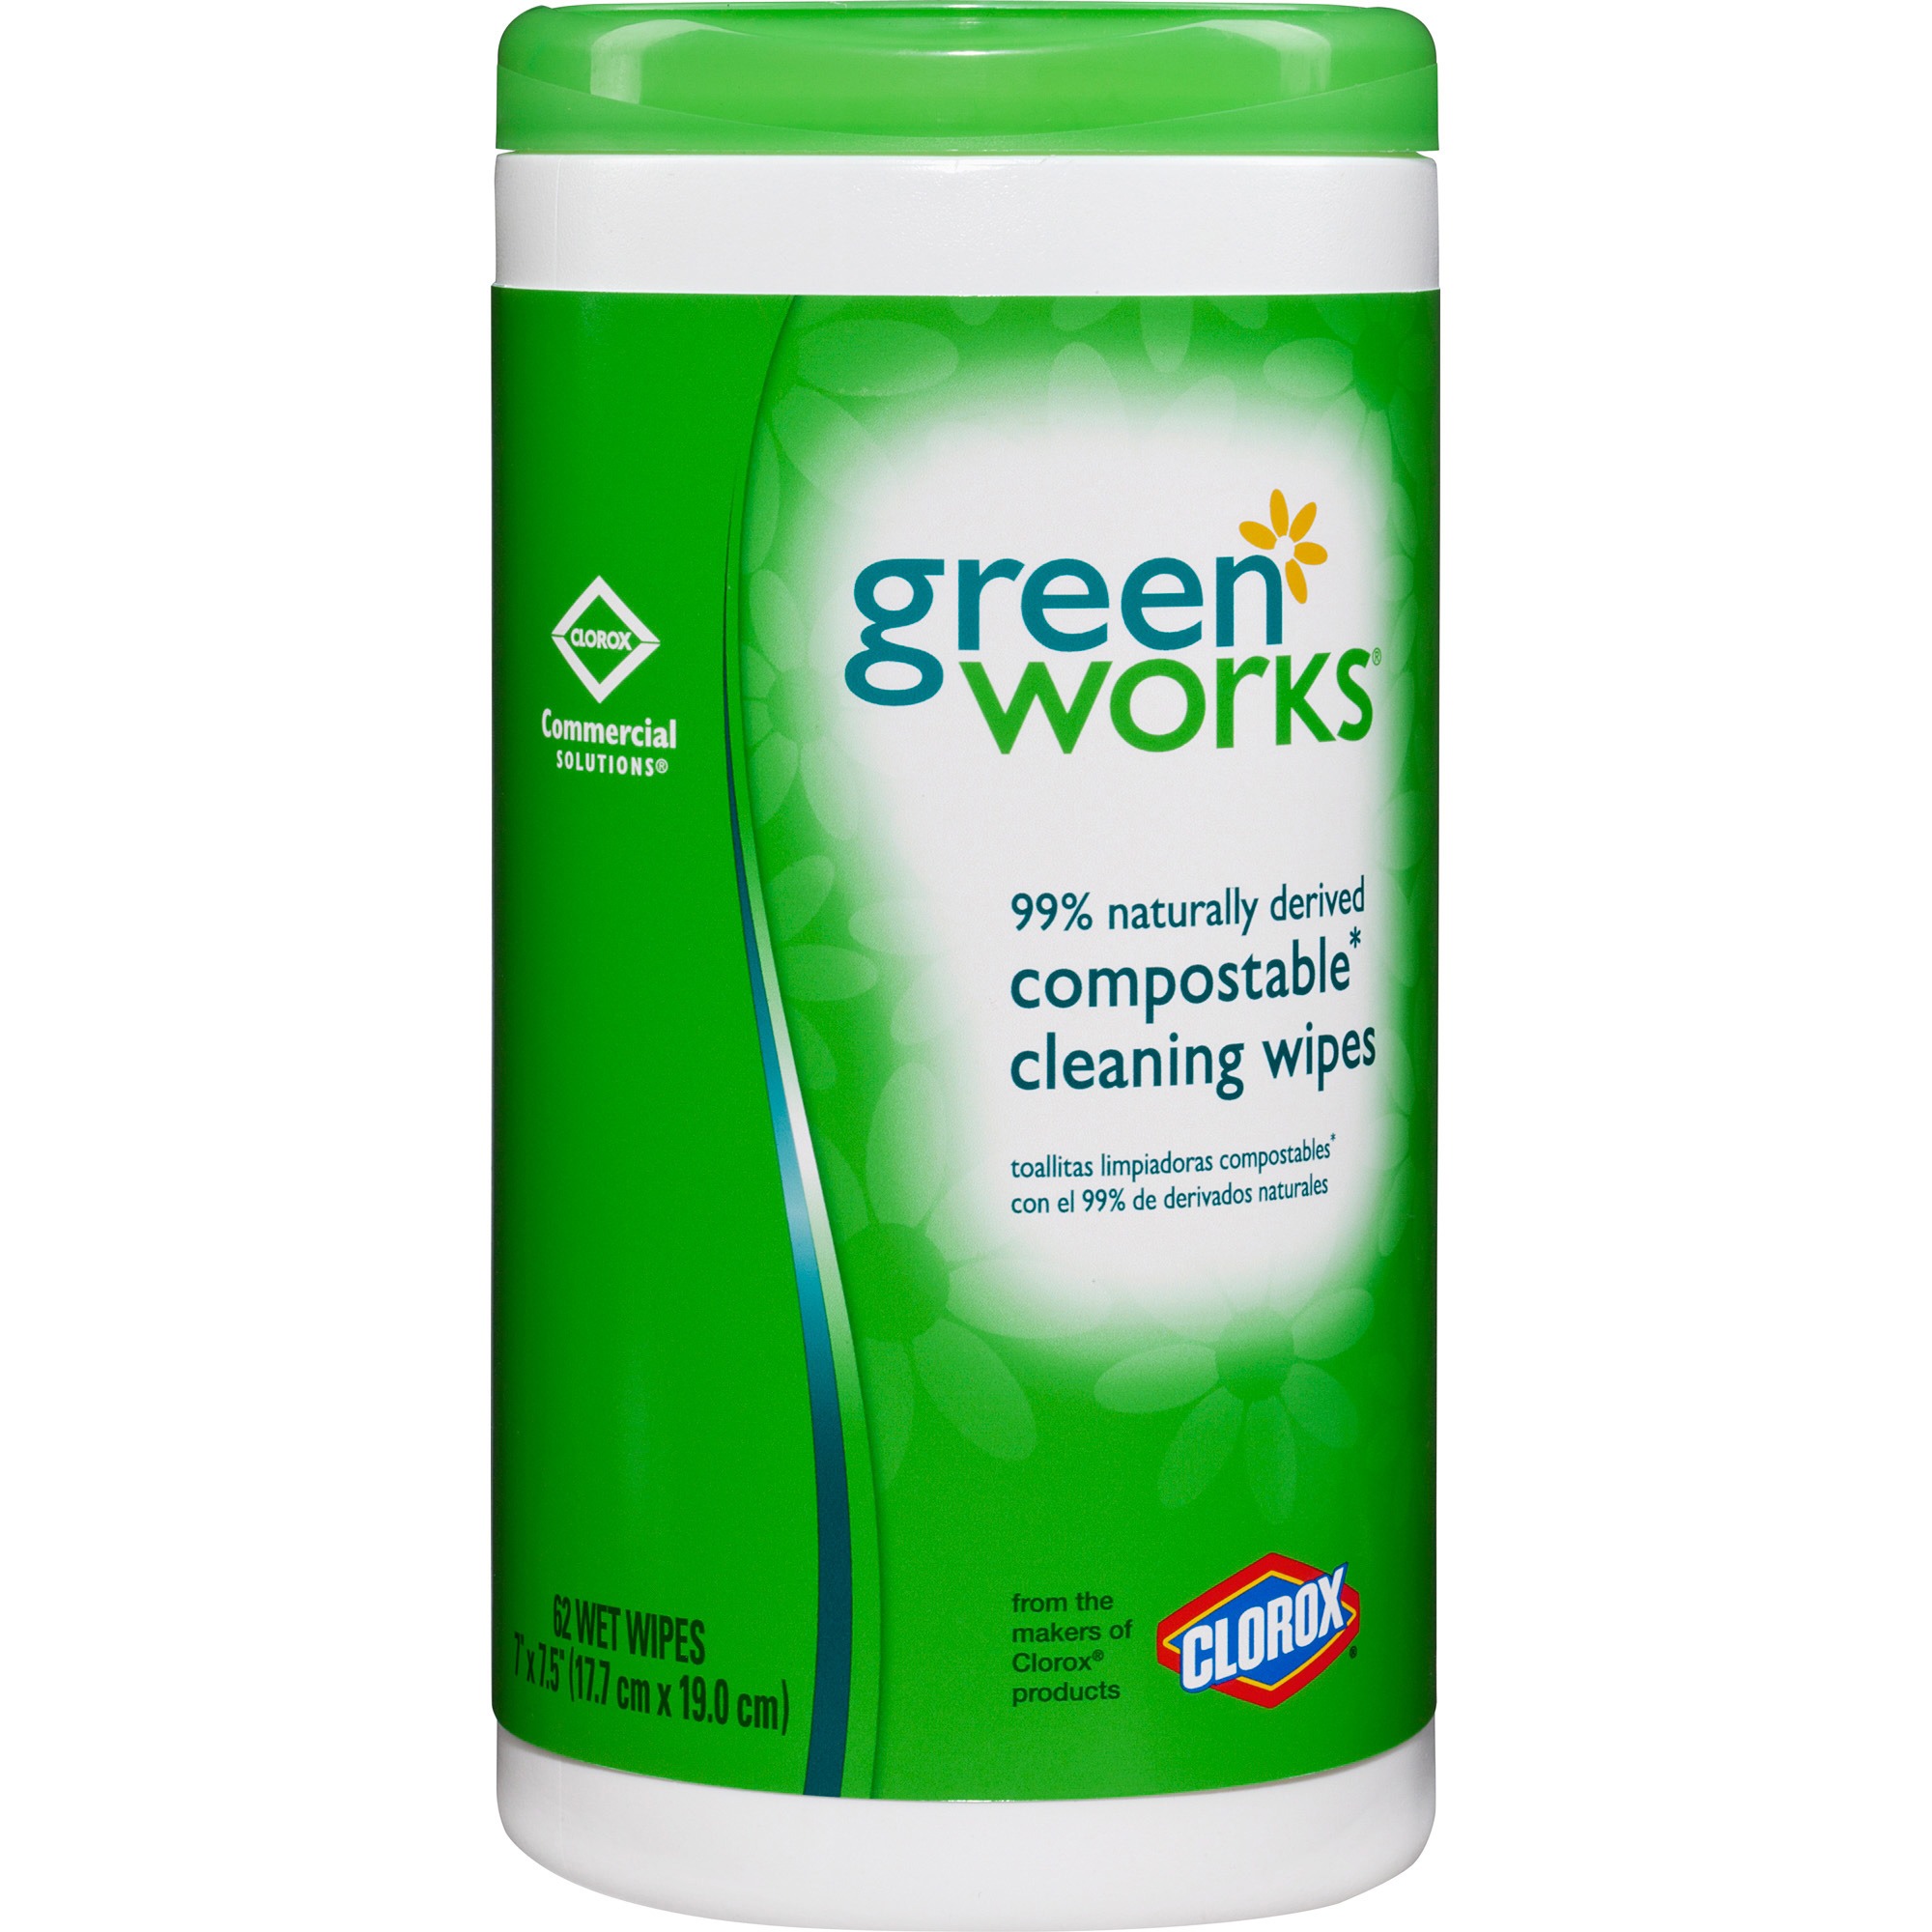 Green Works Cleaning Wipes, 62 Wipes - image 1 of 4